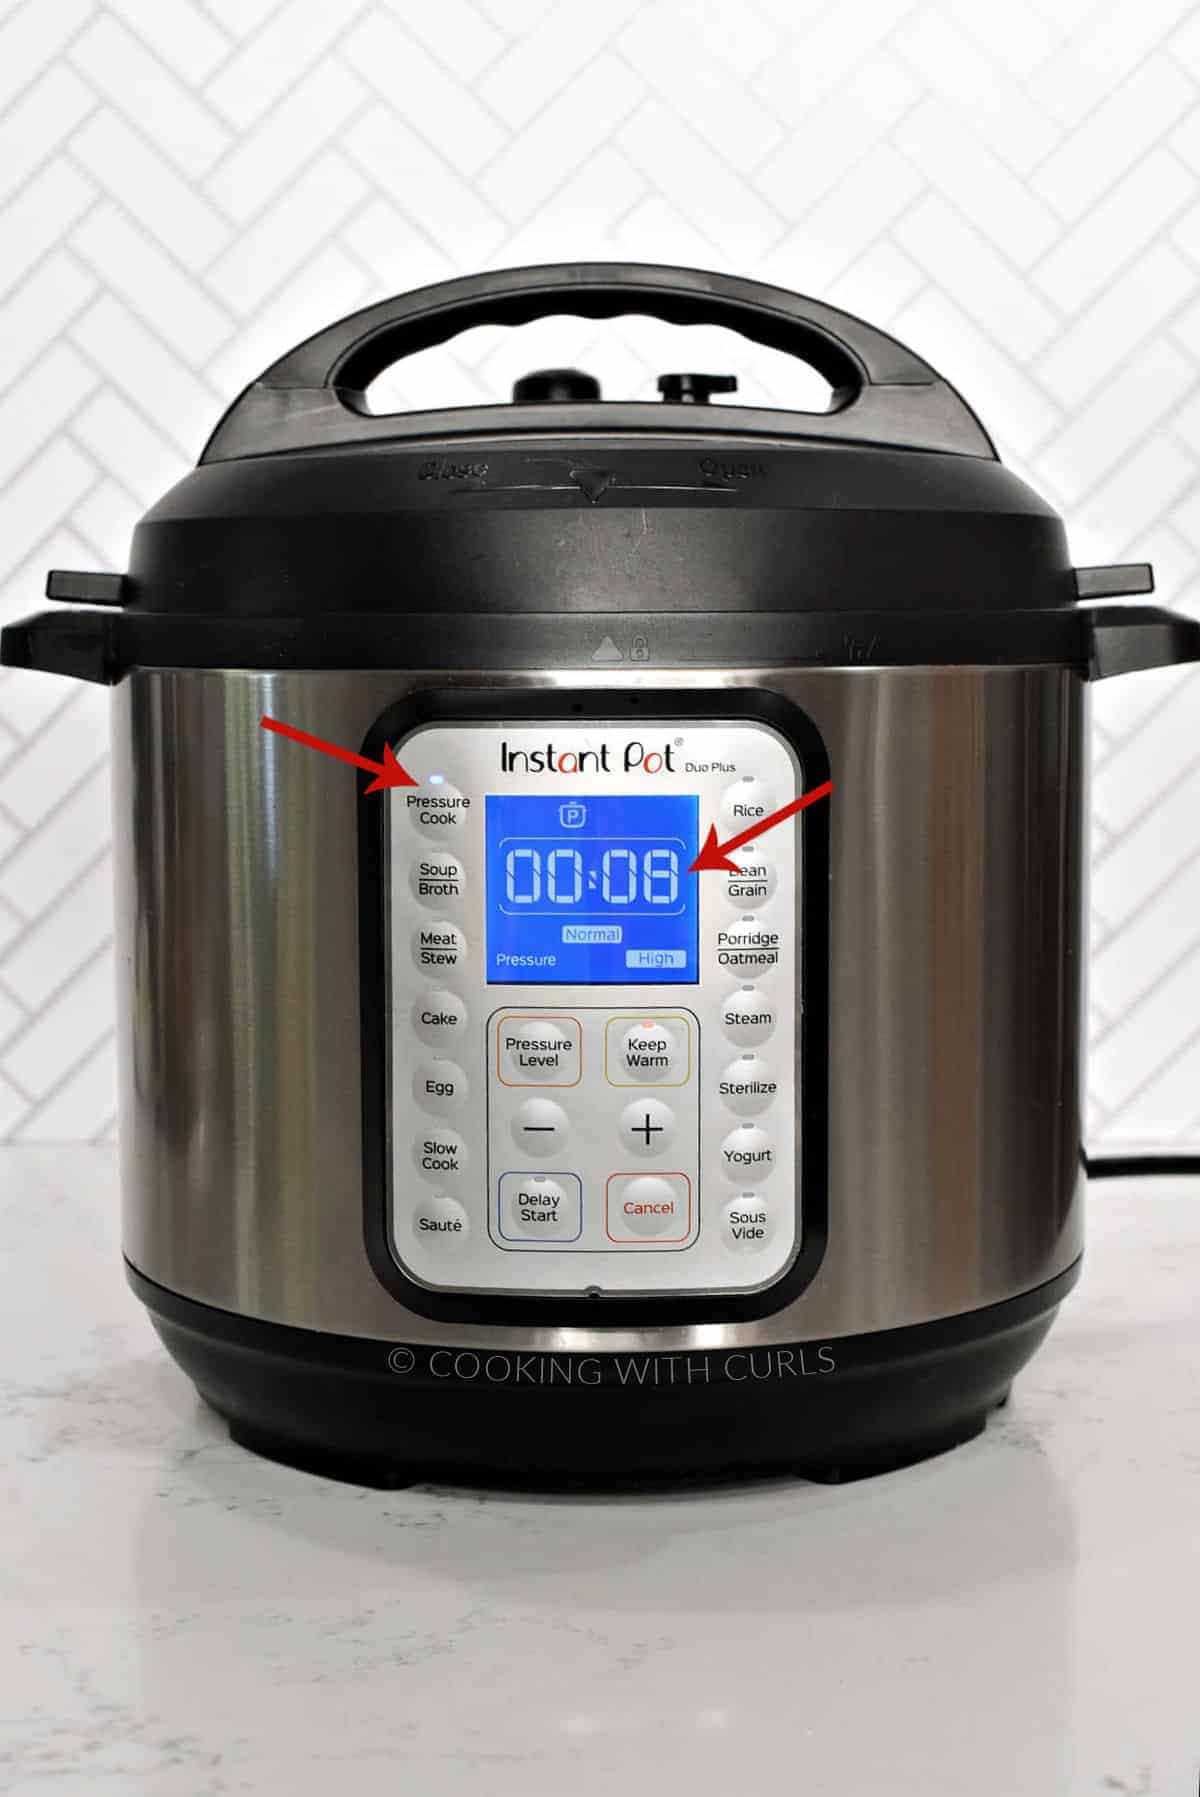 Instant pot set to 8 minutes on HIGH pressure.